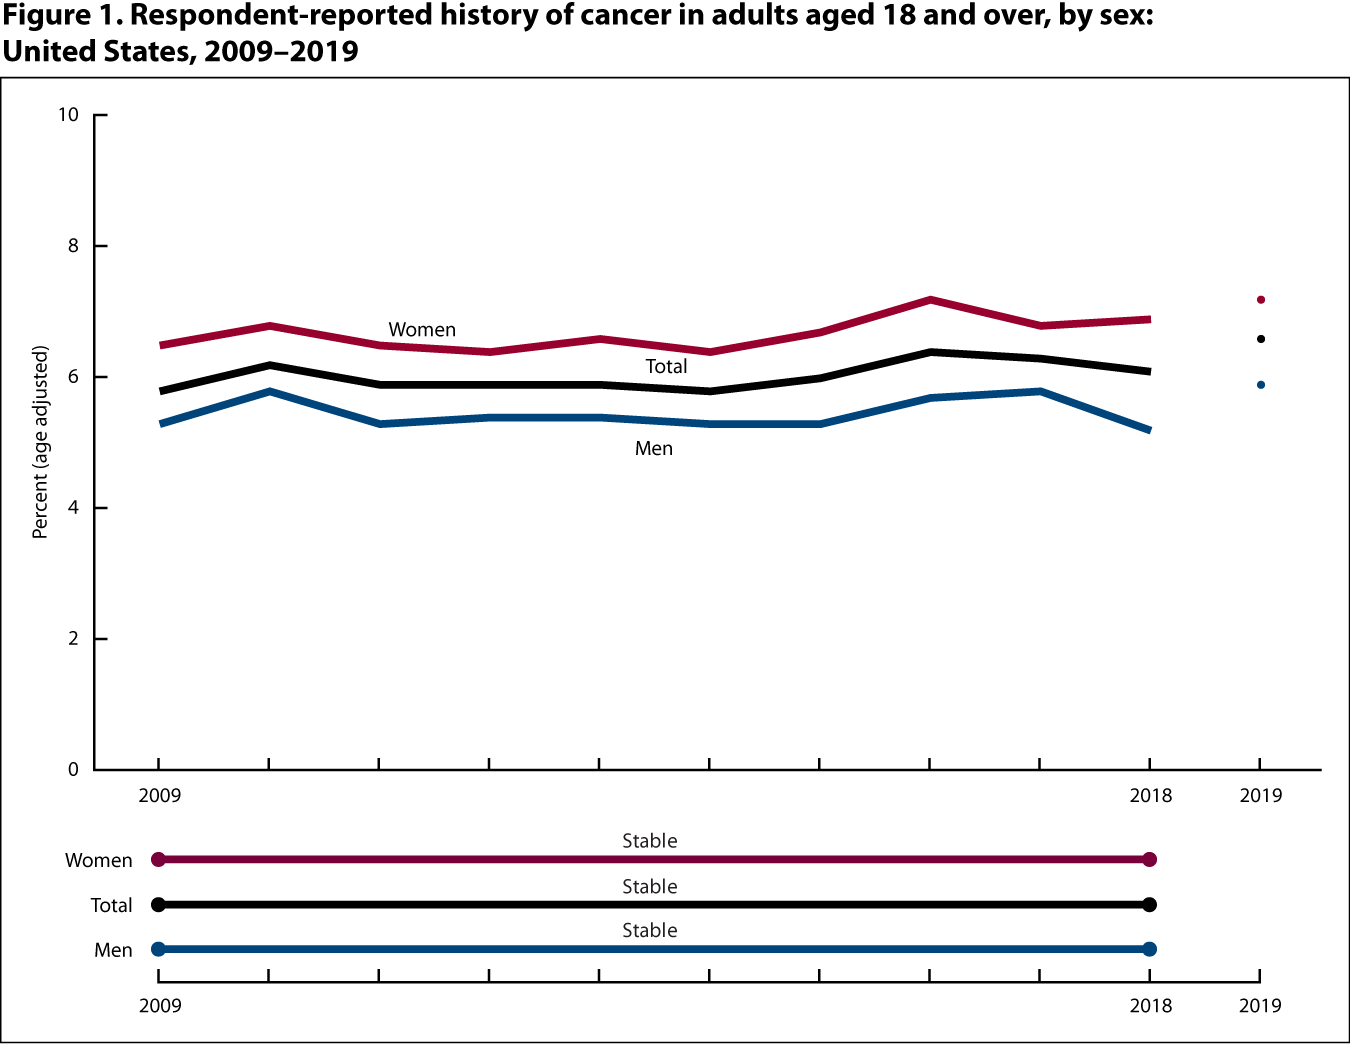 Figure 1 is a line graph showing the percentage of respondent-reported history of cancer among adults aged 18 and over, by sex for 2009 through 2018 (line) and at 2019 (point).